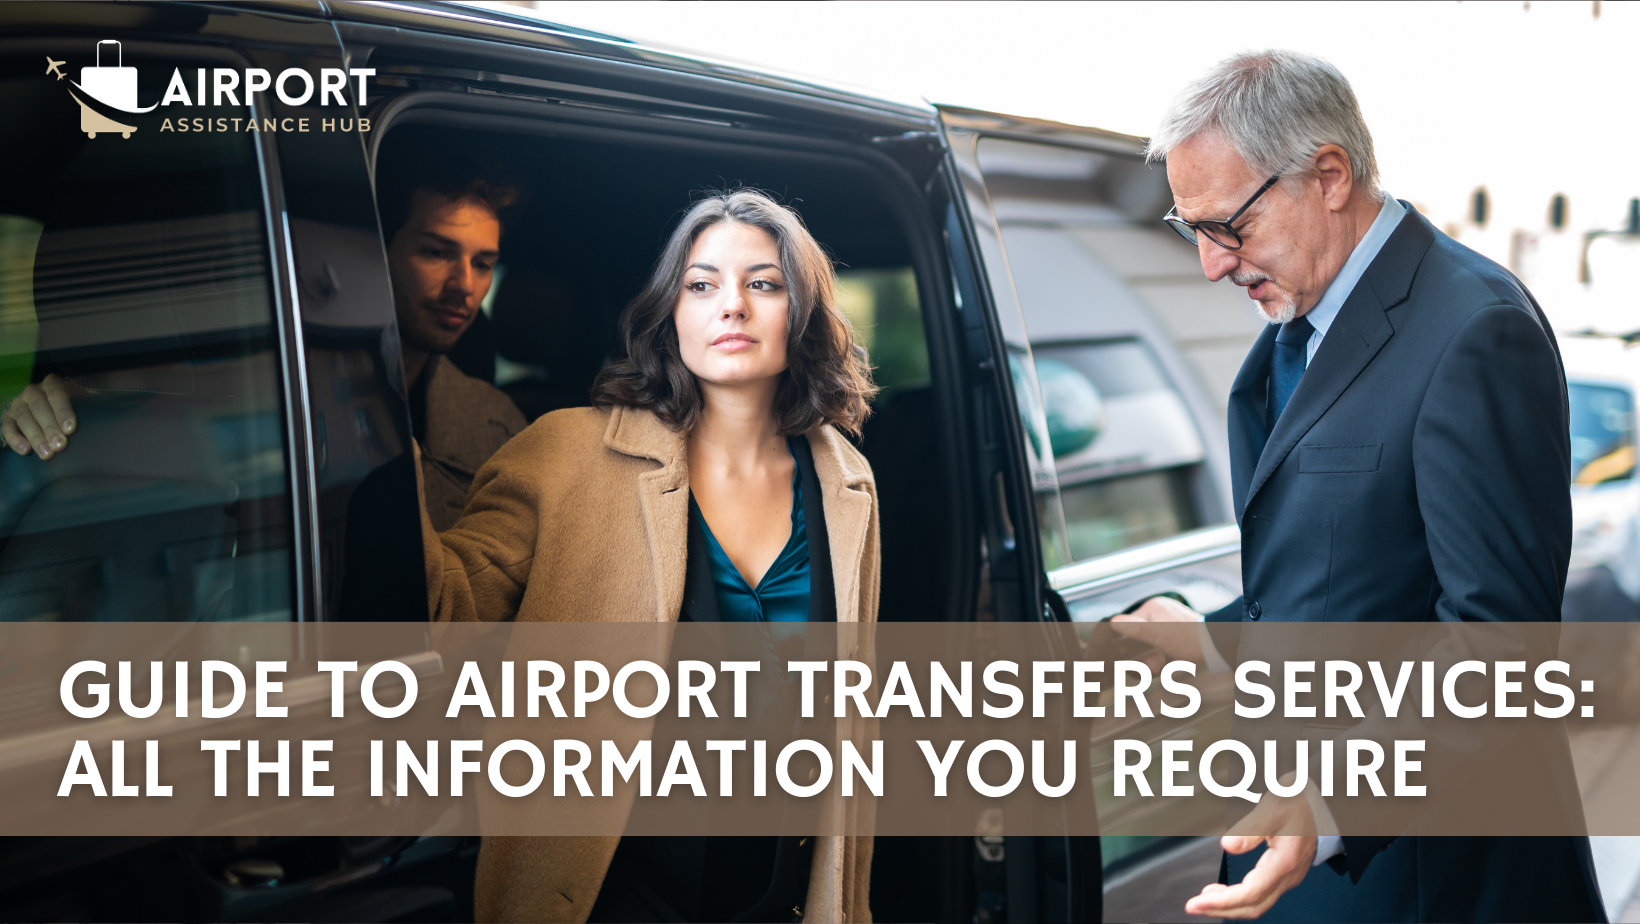 Guide to Airport Transfer Services: All the Information You Require